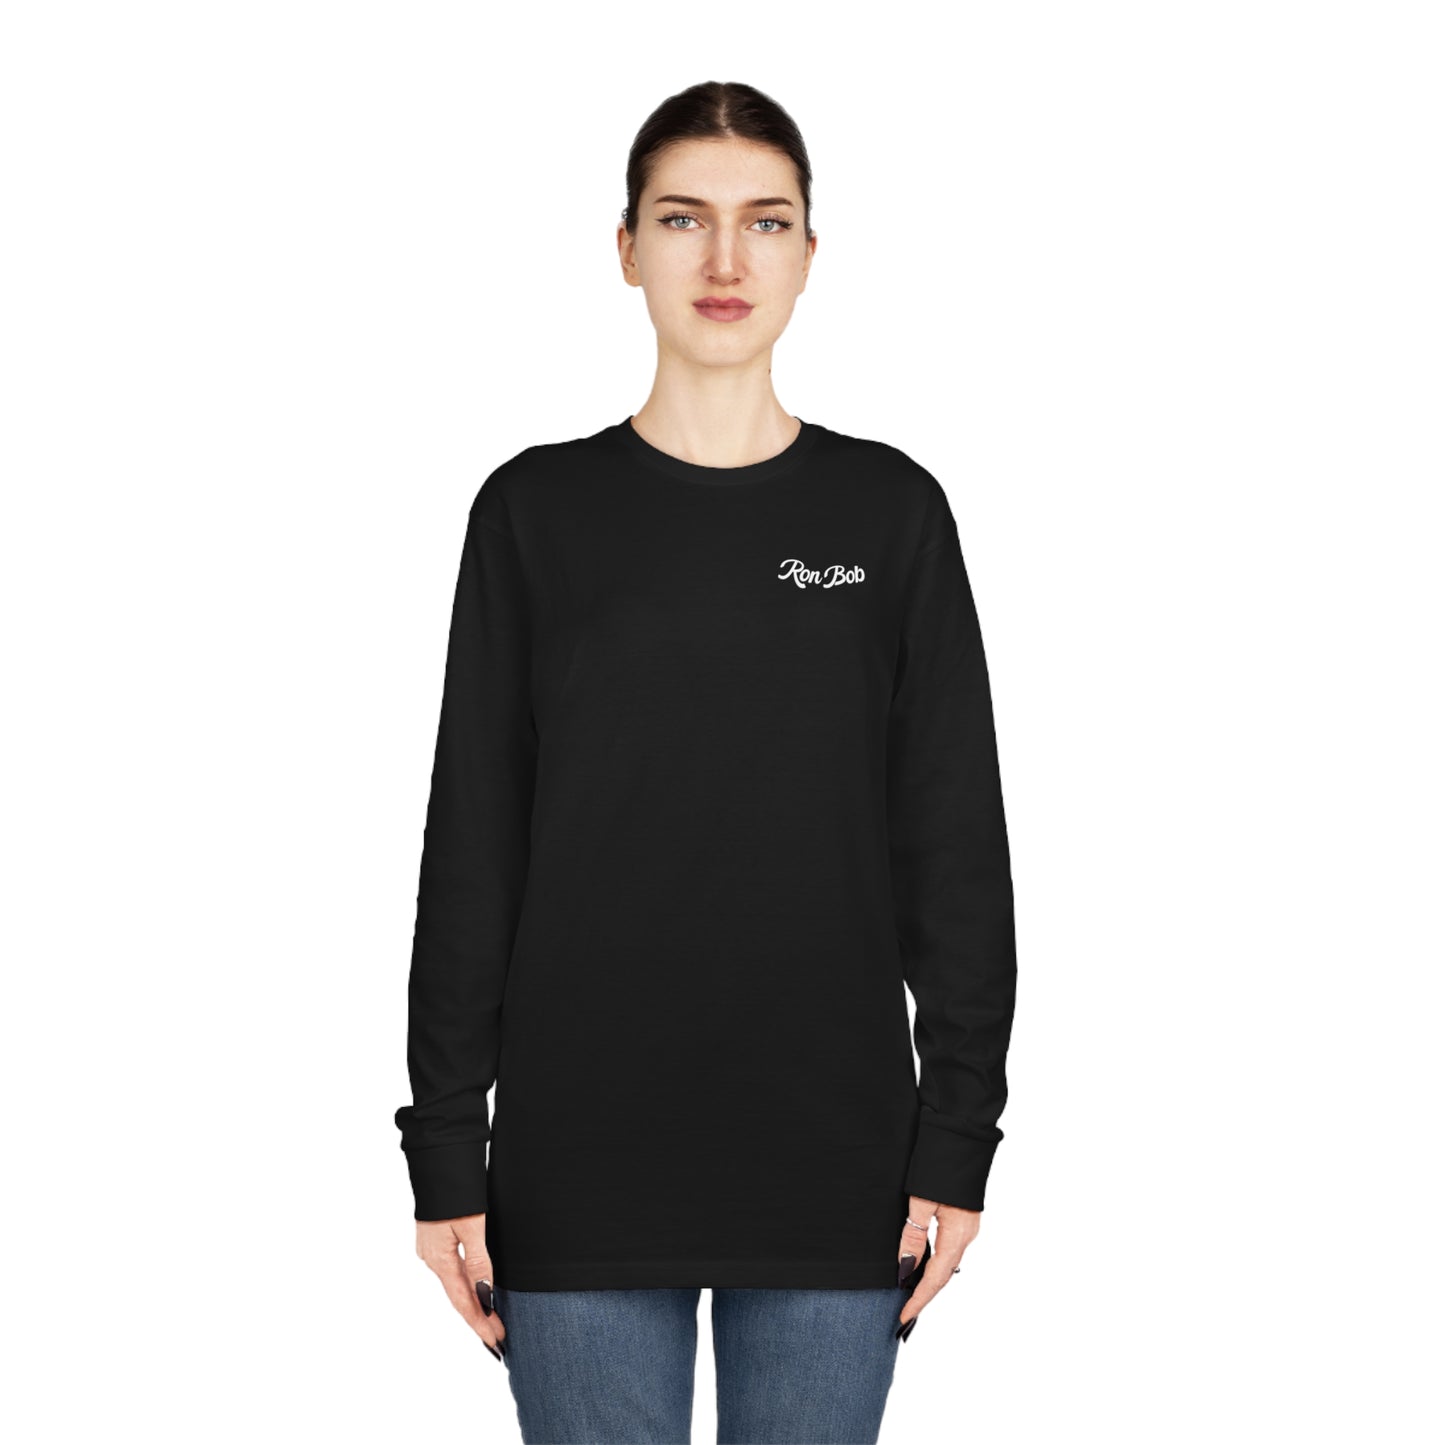 Men's Long Sleeve Crewneck Tee with Full Color Logo (Multiple Color Options)